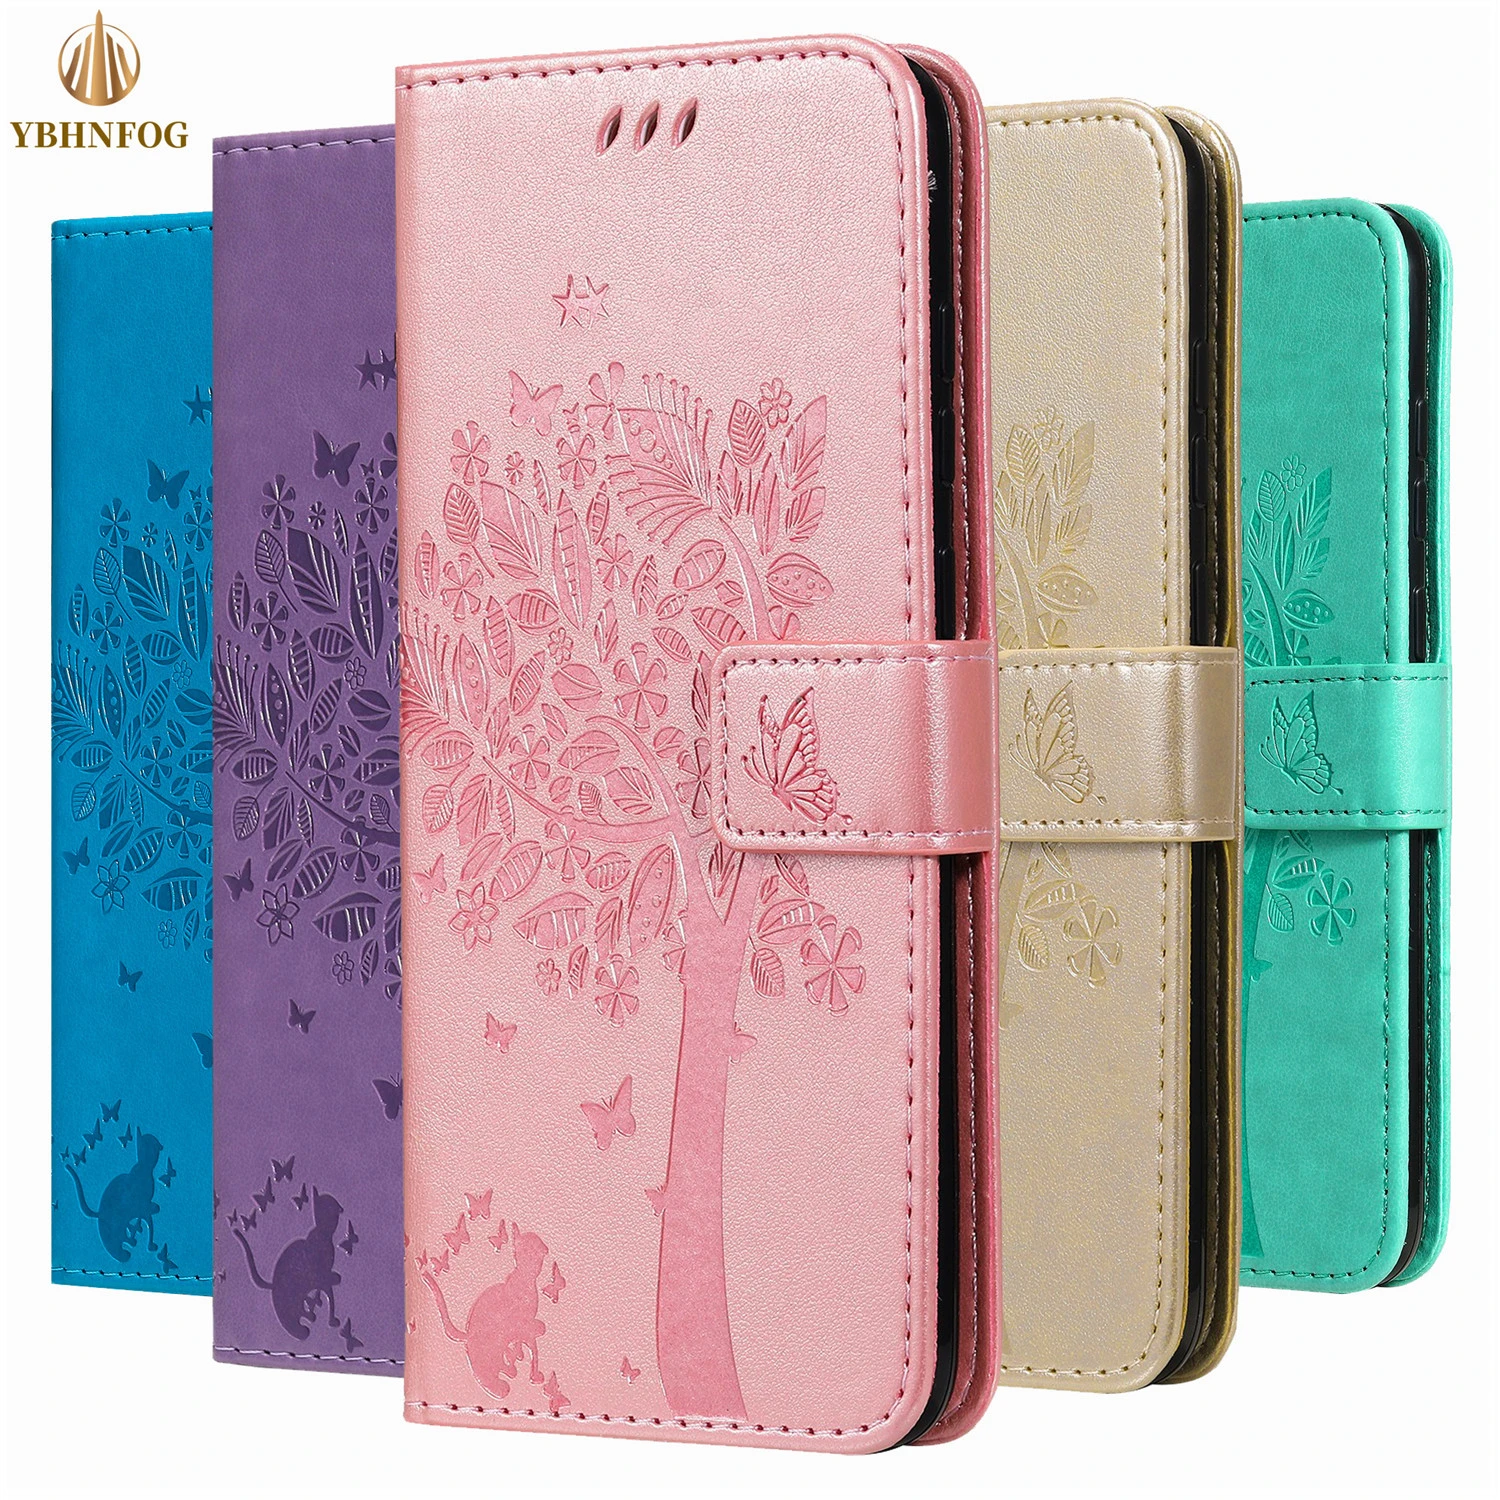 mobile flip cover Leather Wallet Case For Huawei P8 P9 Lite 2017 P10 P20 P30 P40 Pro Y6 Y7 2019 Mate 20 Lite Holder Flip Stand Cover Phone Coque waterproof phone pouch